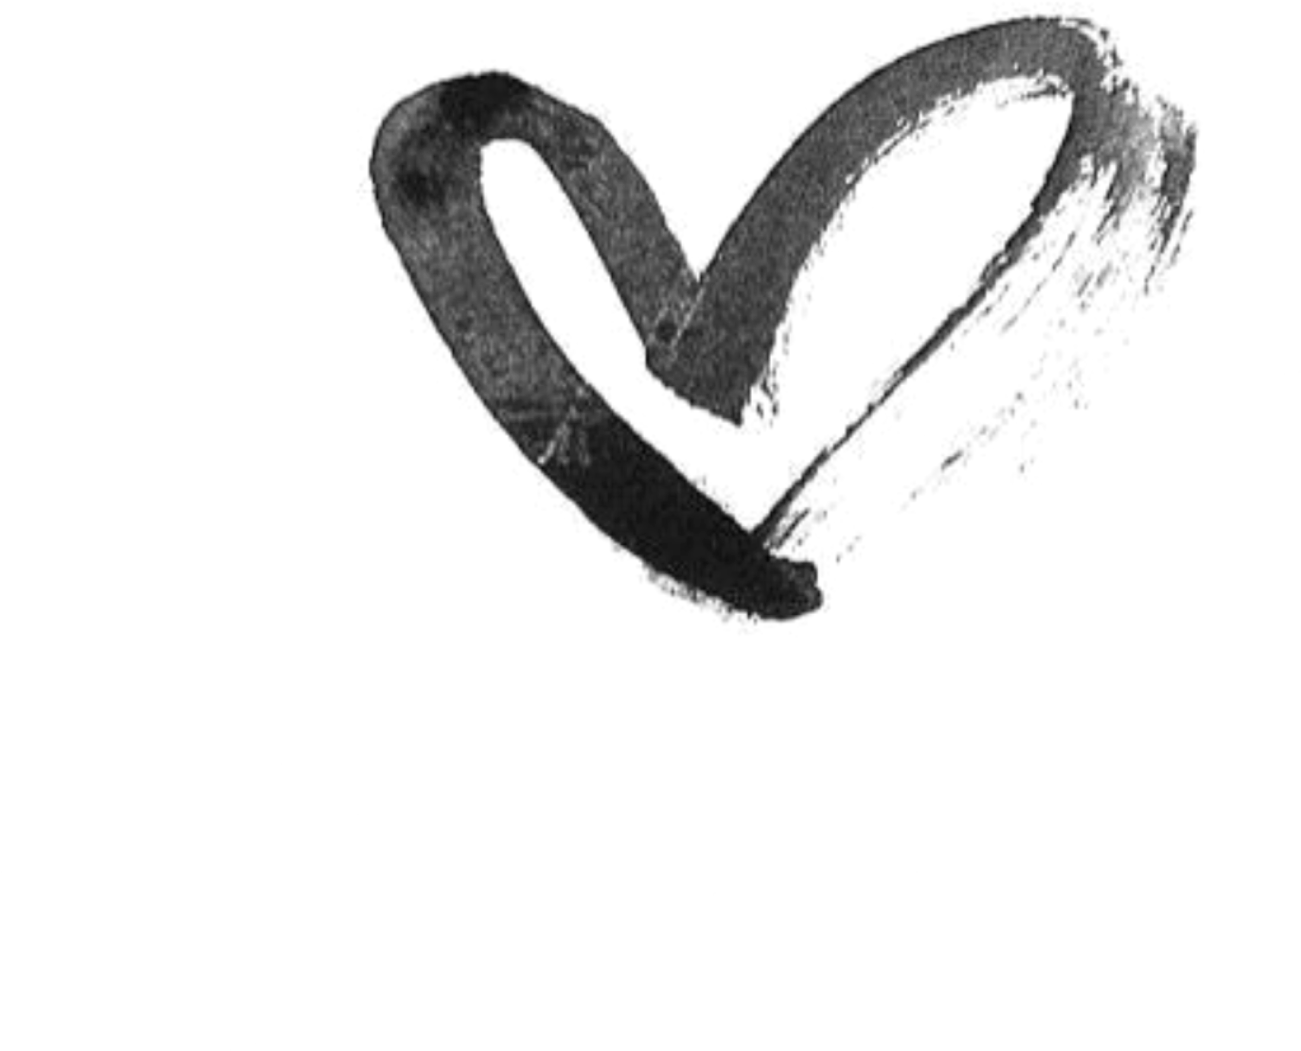 A Heart Drawn On A Black Background